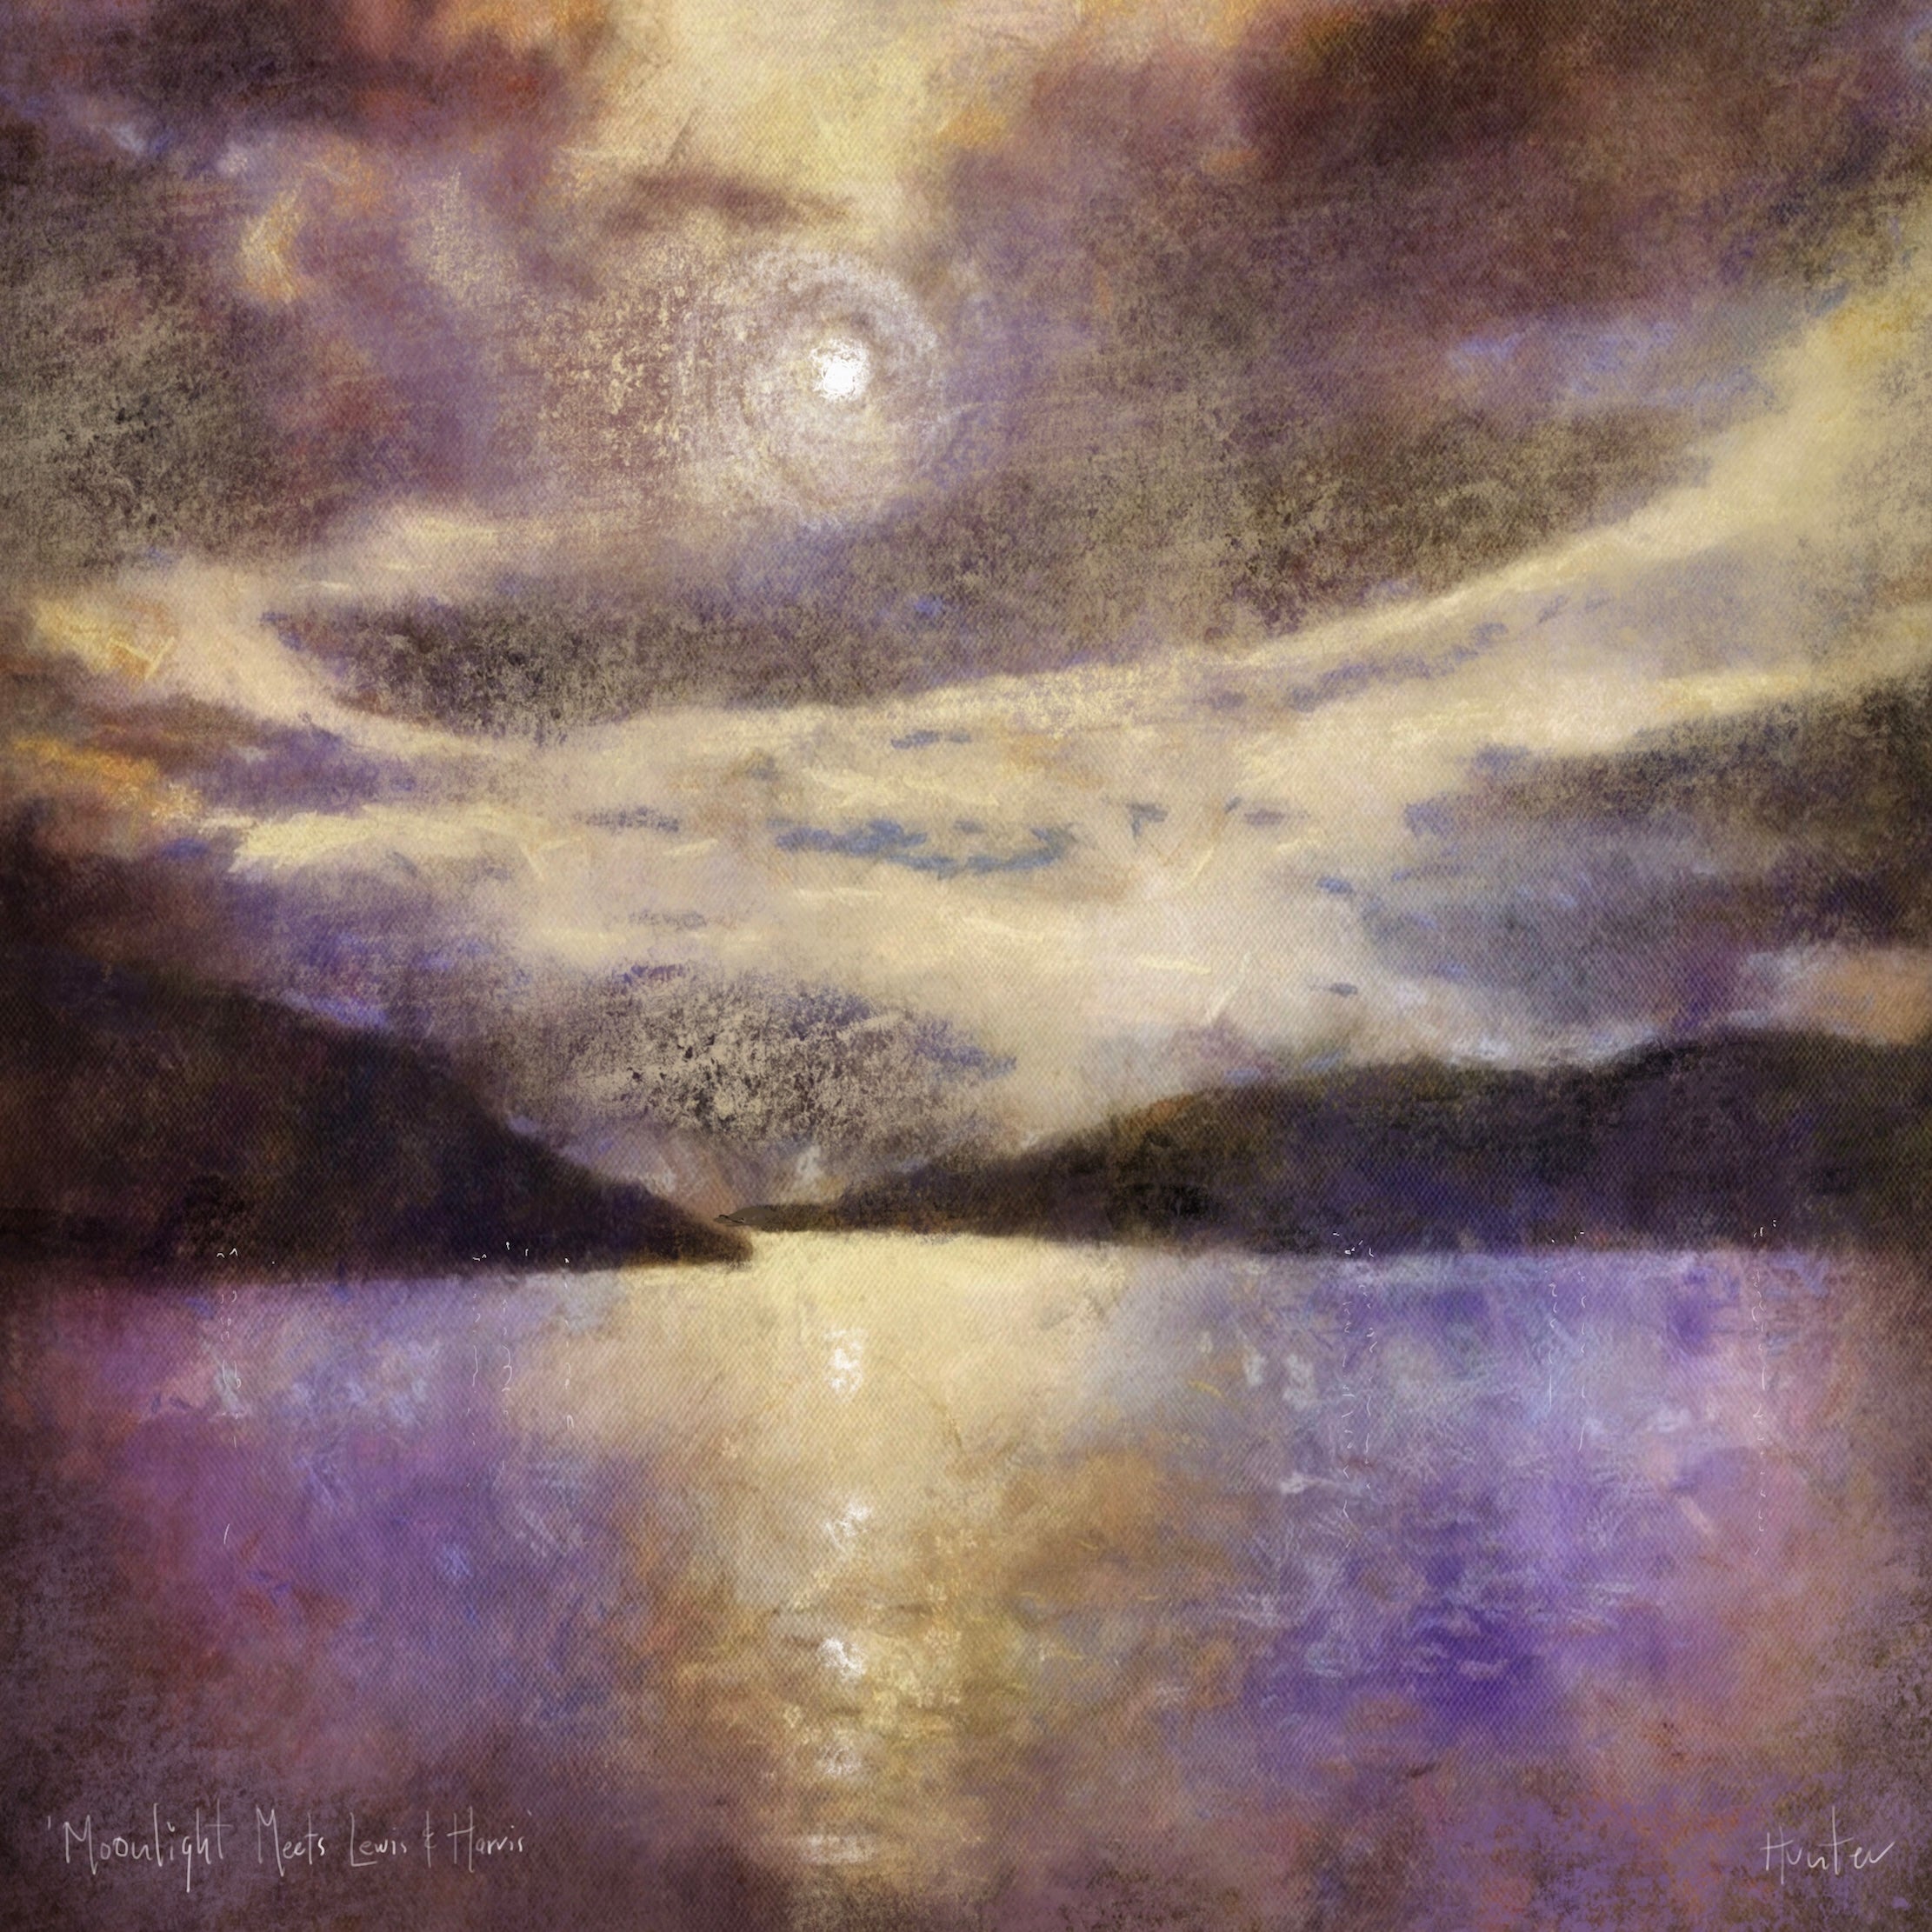 Moonlight Meets Lewis & Harris | Scotland In Your Pocket Art Print-Scotland In Your Pocket Framed Prints-Hebridean Islands Art Gallery-Paintings, Prints, Homeware, Art Gifts From Scotland By Scottish Artist Kevin Hunter